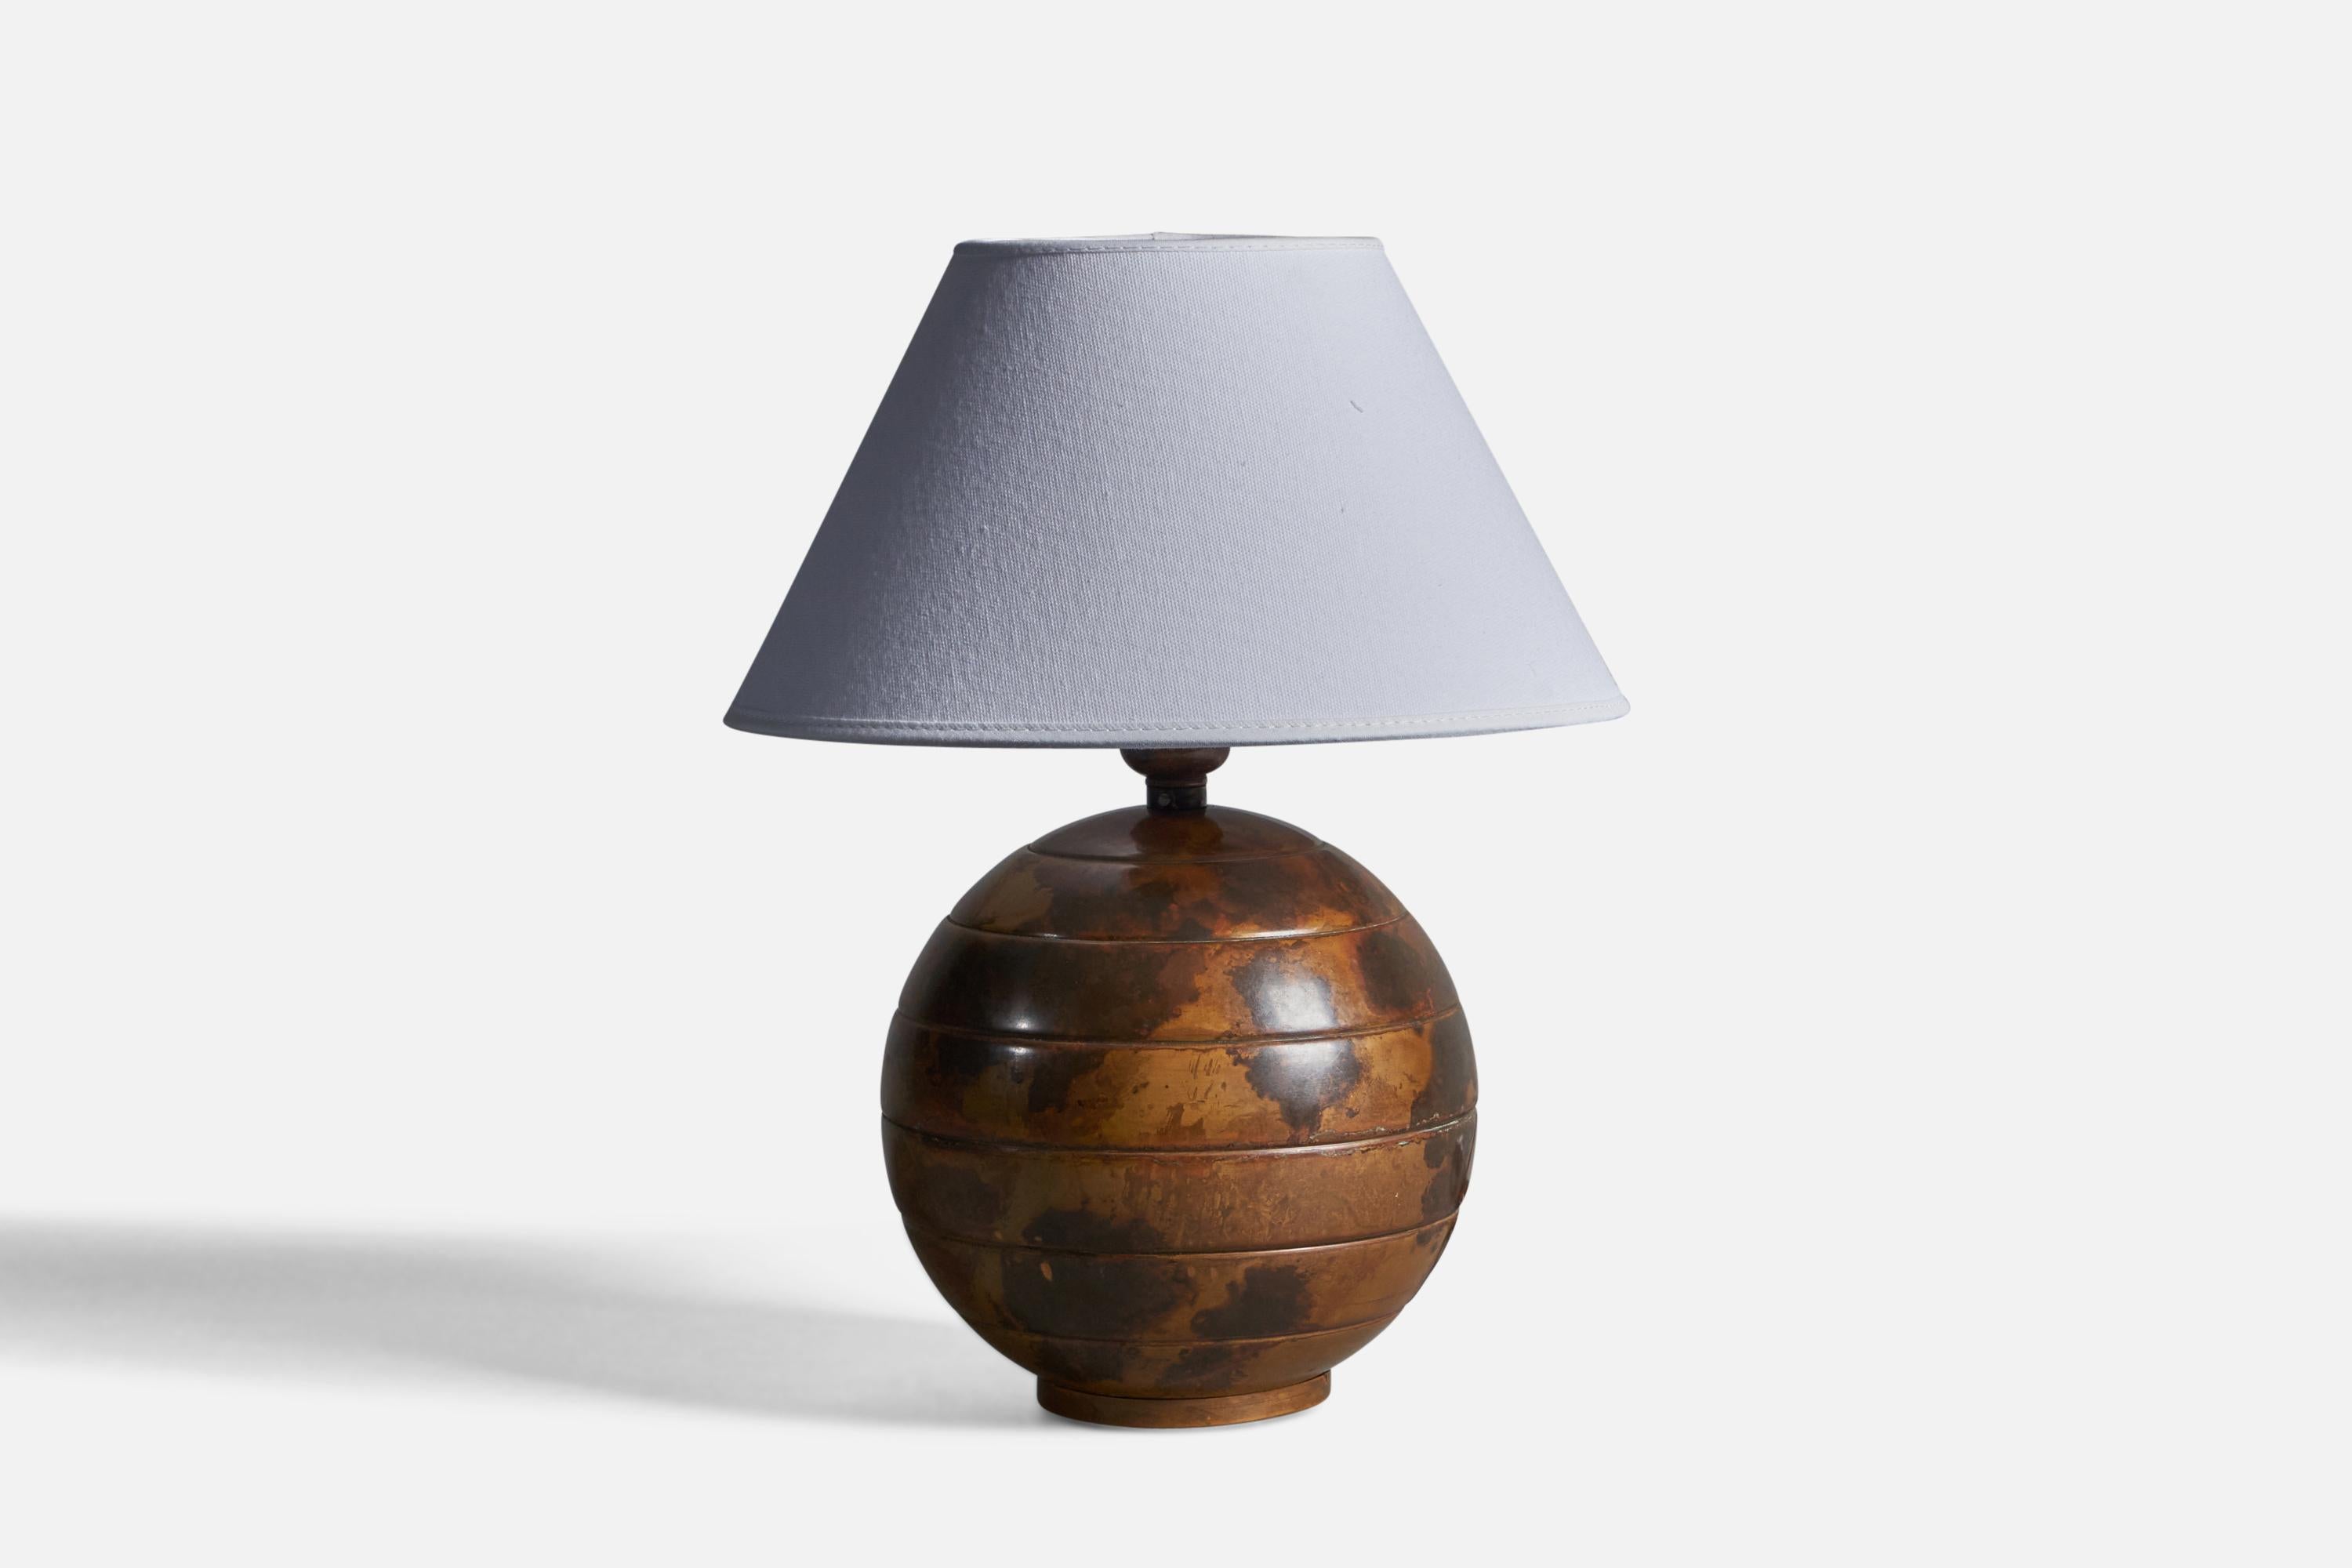 A patinated bronze table lamp, designed and produced in Sweden, c. 1930s.

Dimensions of Lamp (inches): 10.25